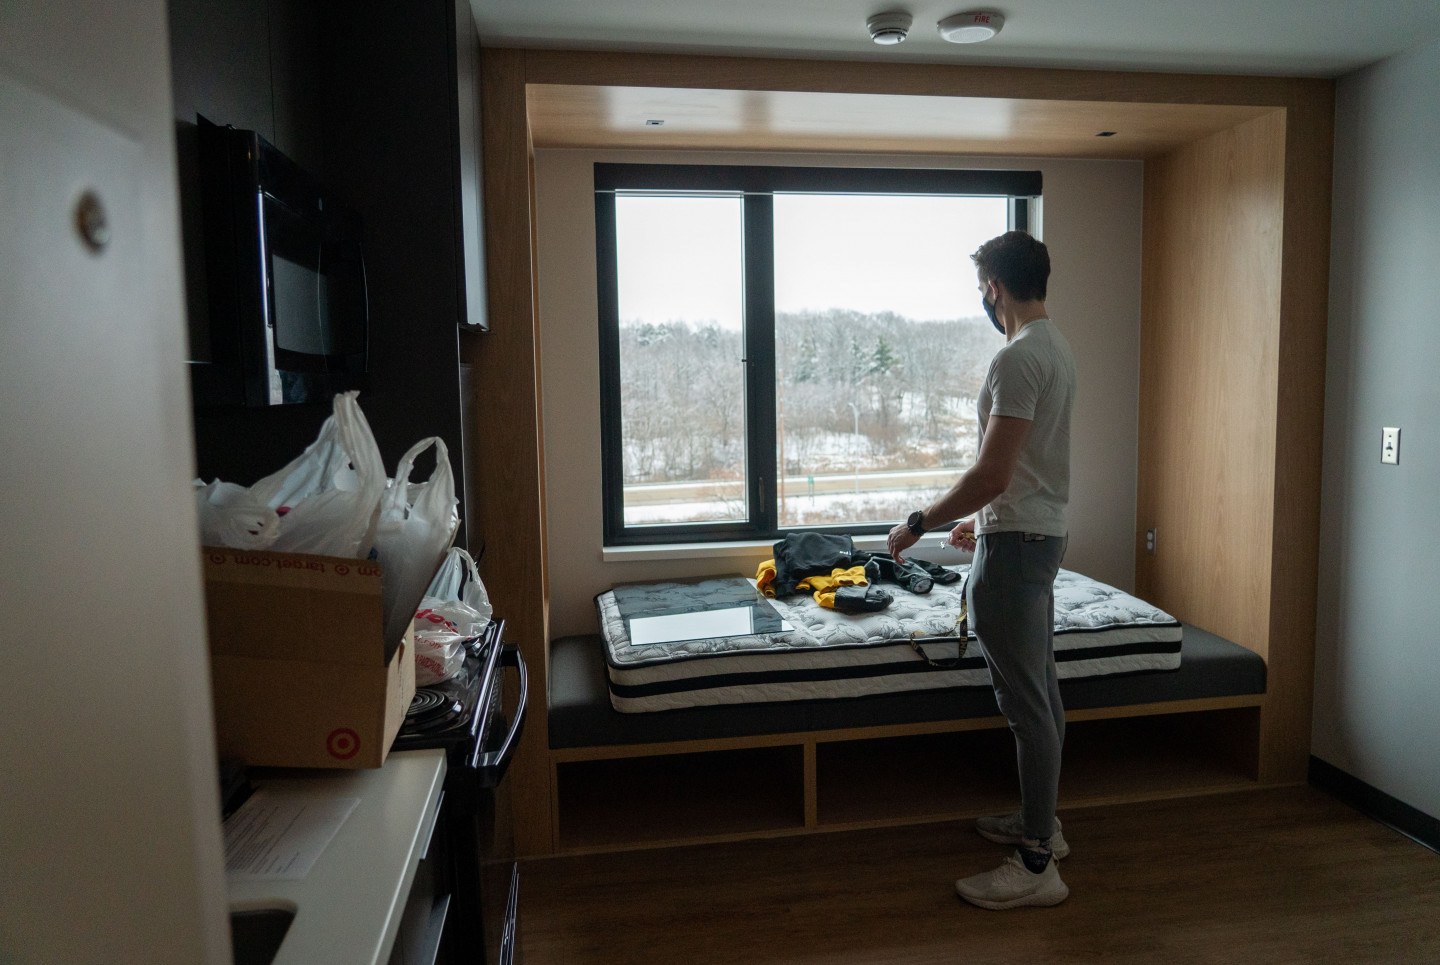 A student stands by a large window in his apartment.